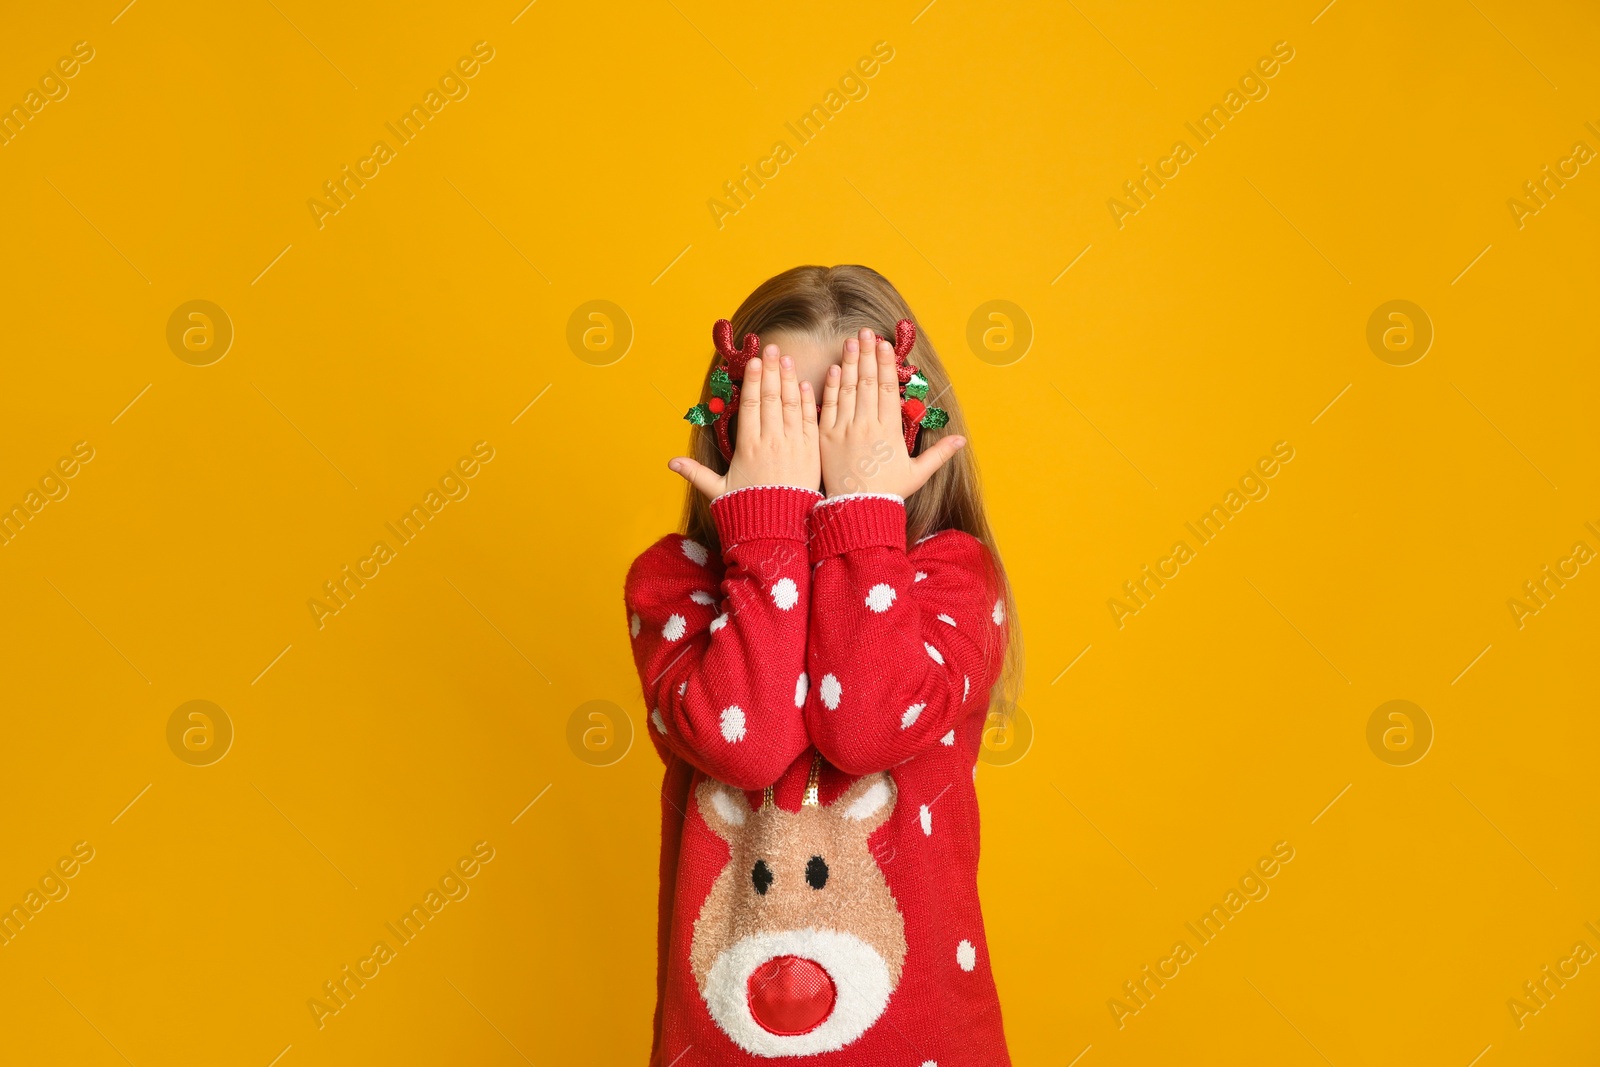 Photo of Cute little girl in Christmas sweater hiding her face on yellow background